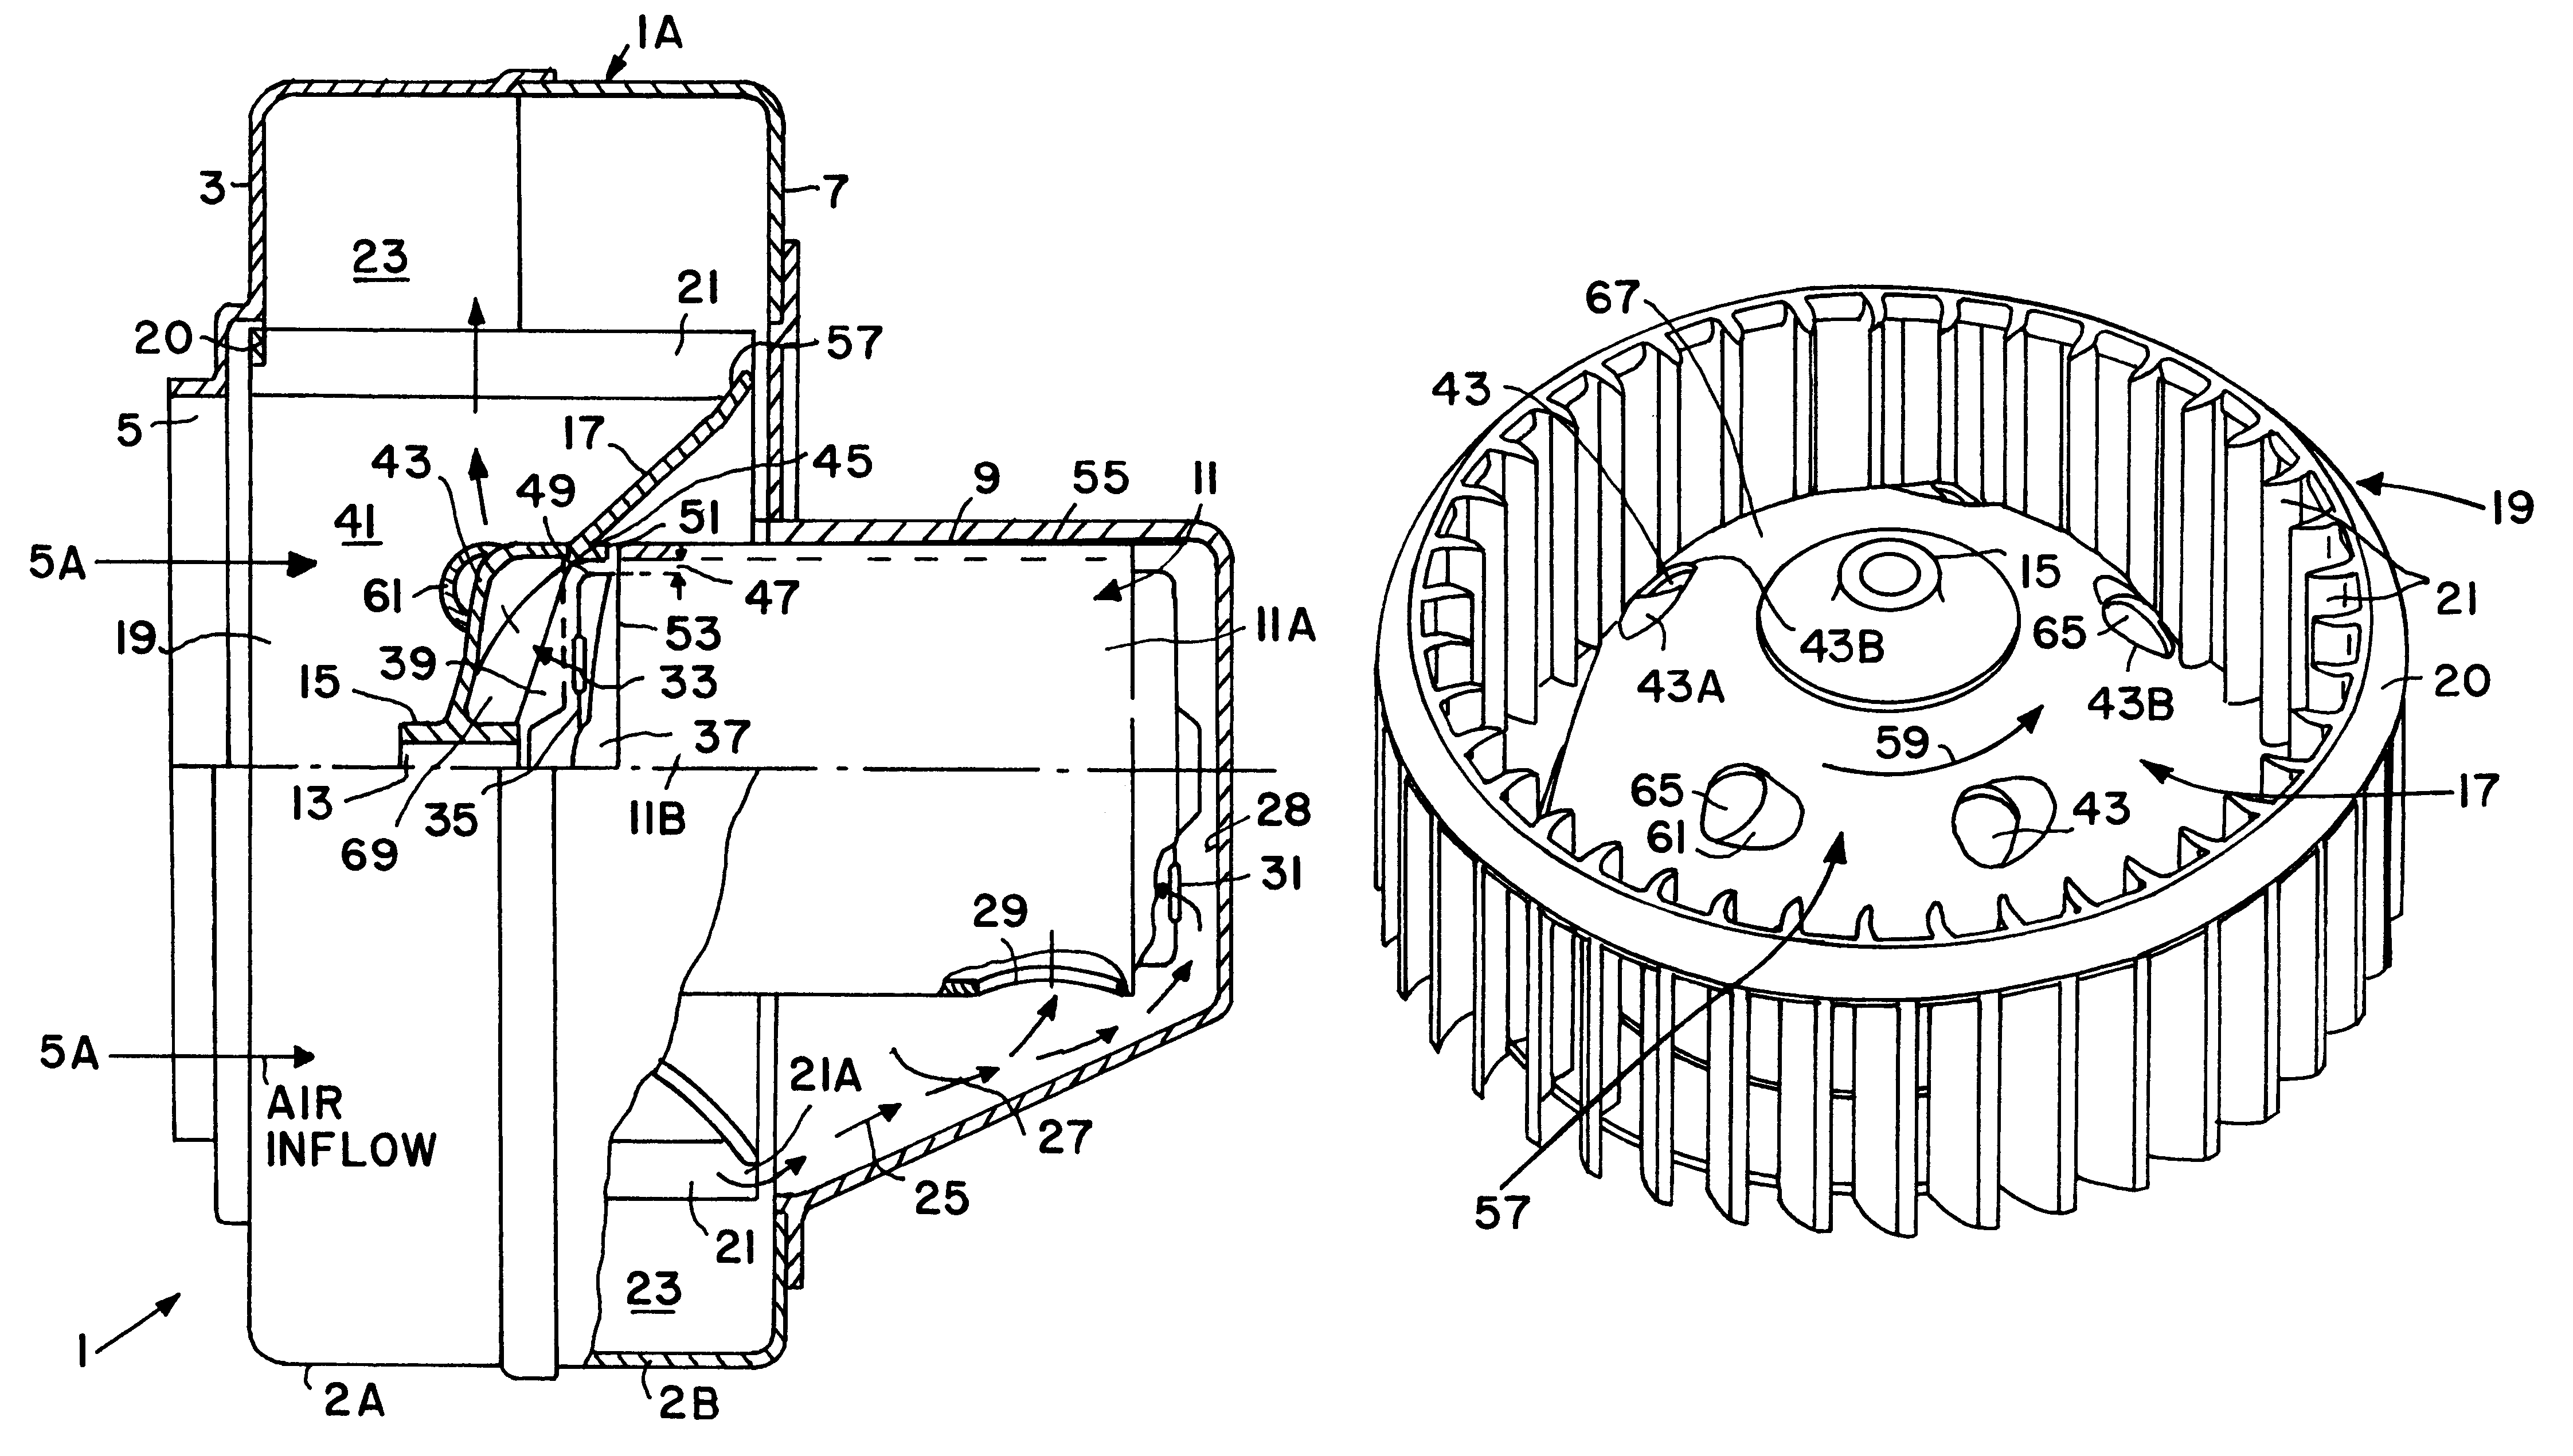 Radial blower, particularly for heating and air conditioning systems in automobiles